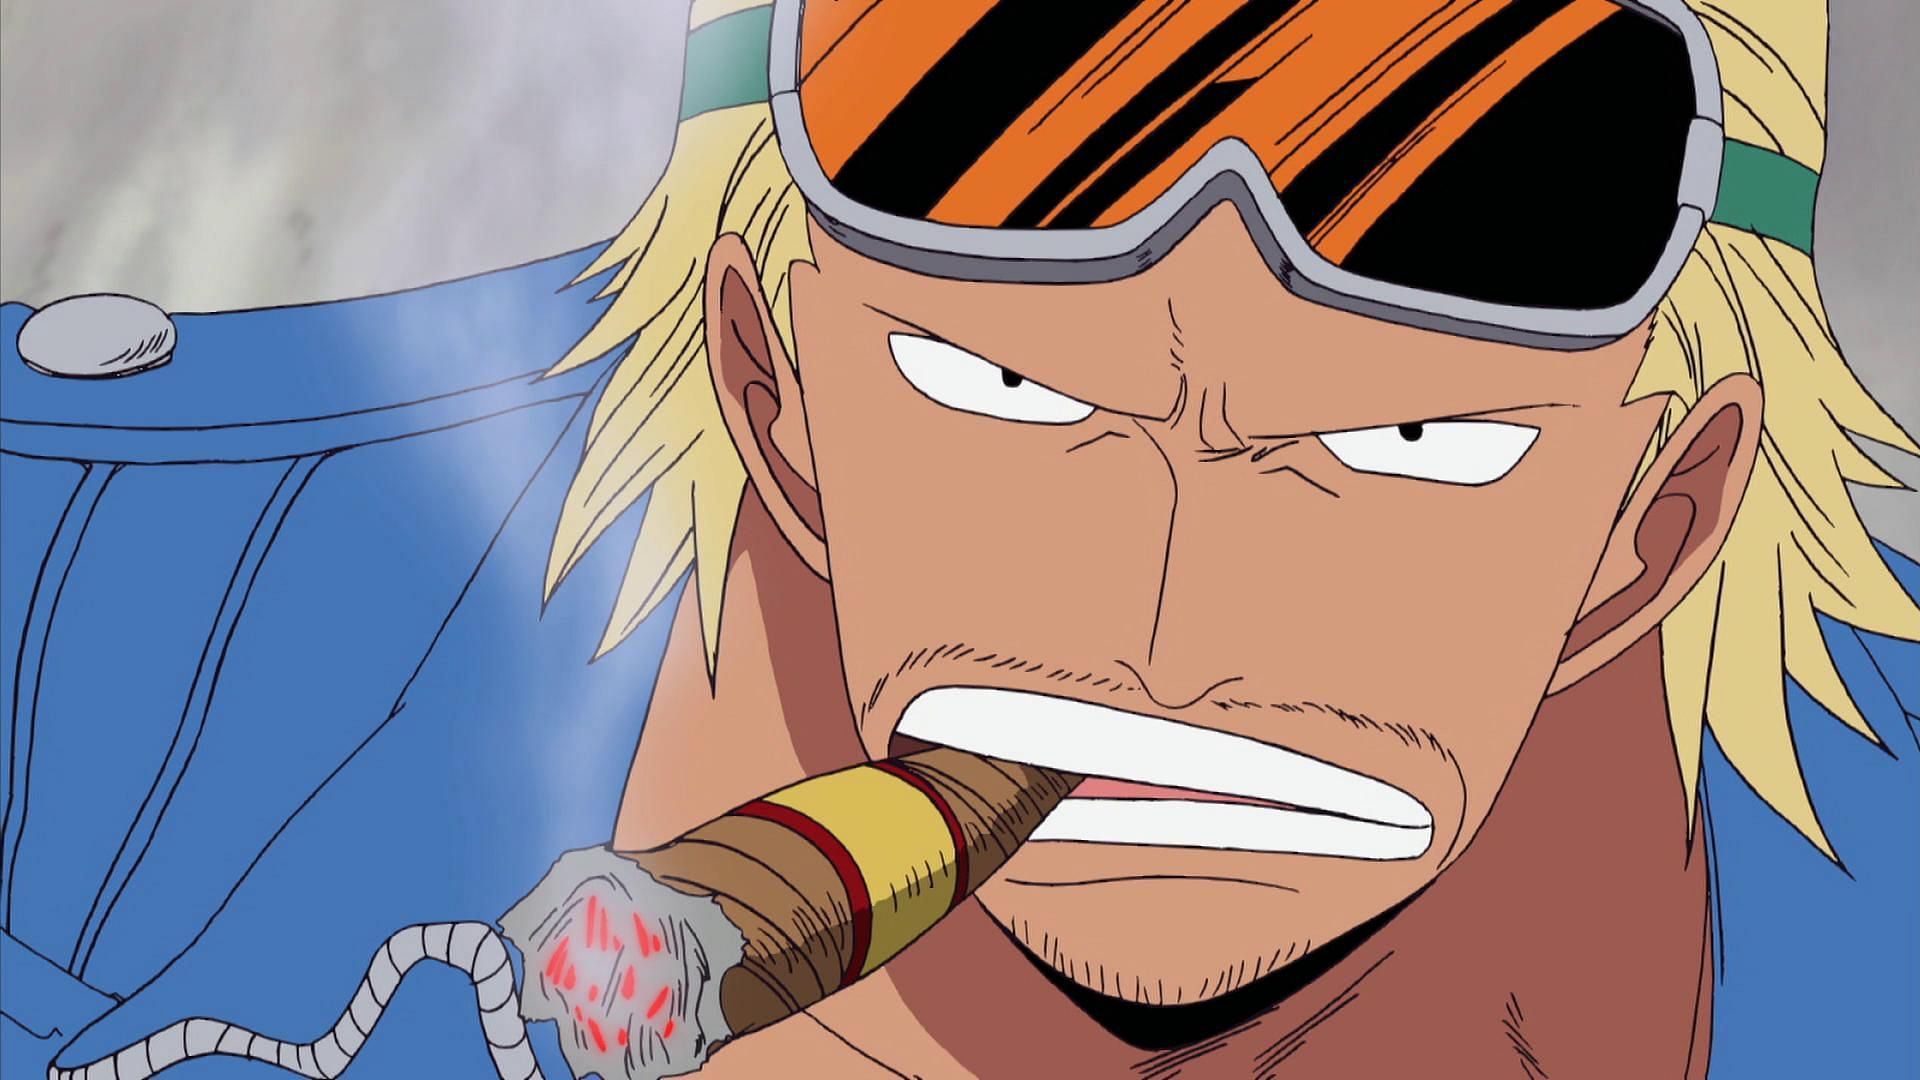 Paulie as seen in the One Piece anime (Image via Toei Animation)